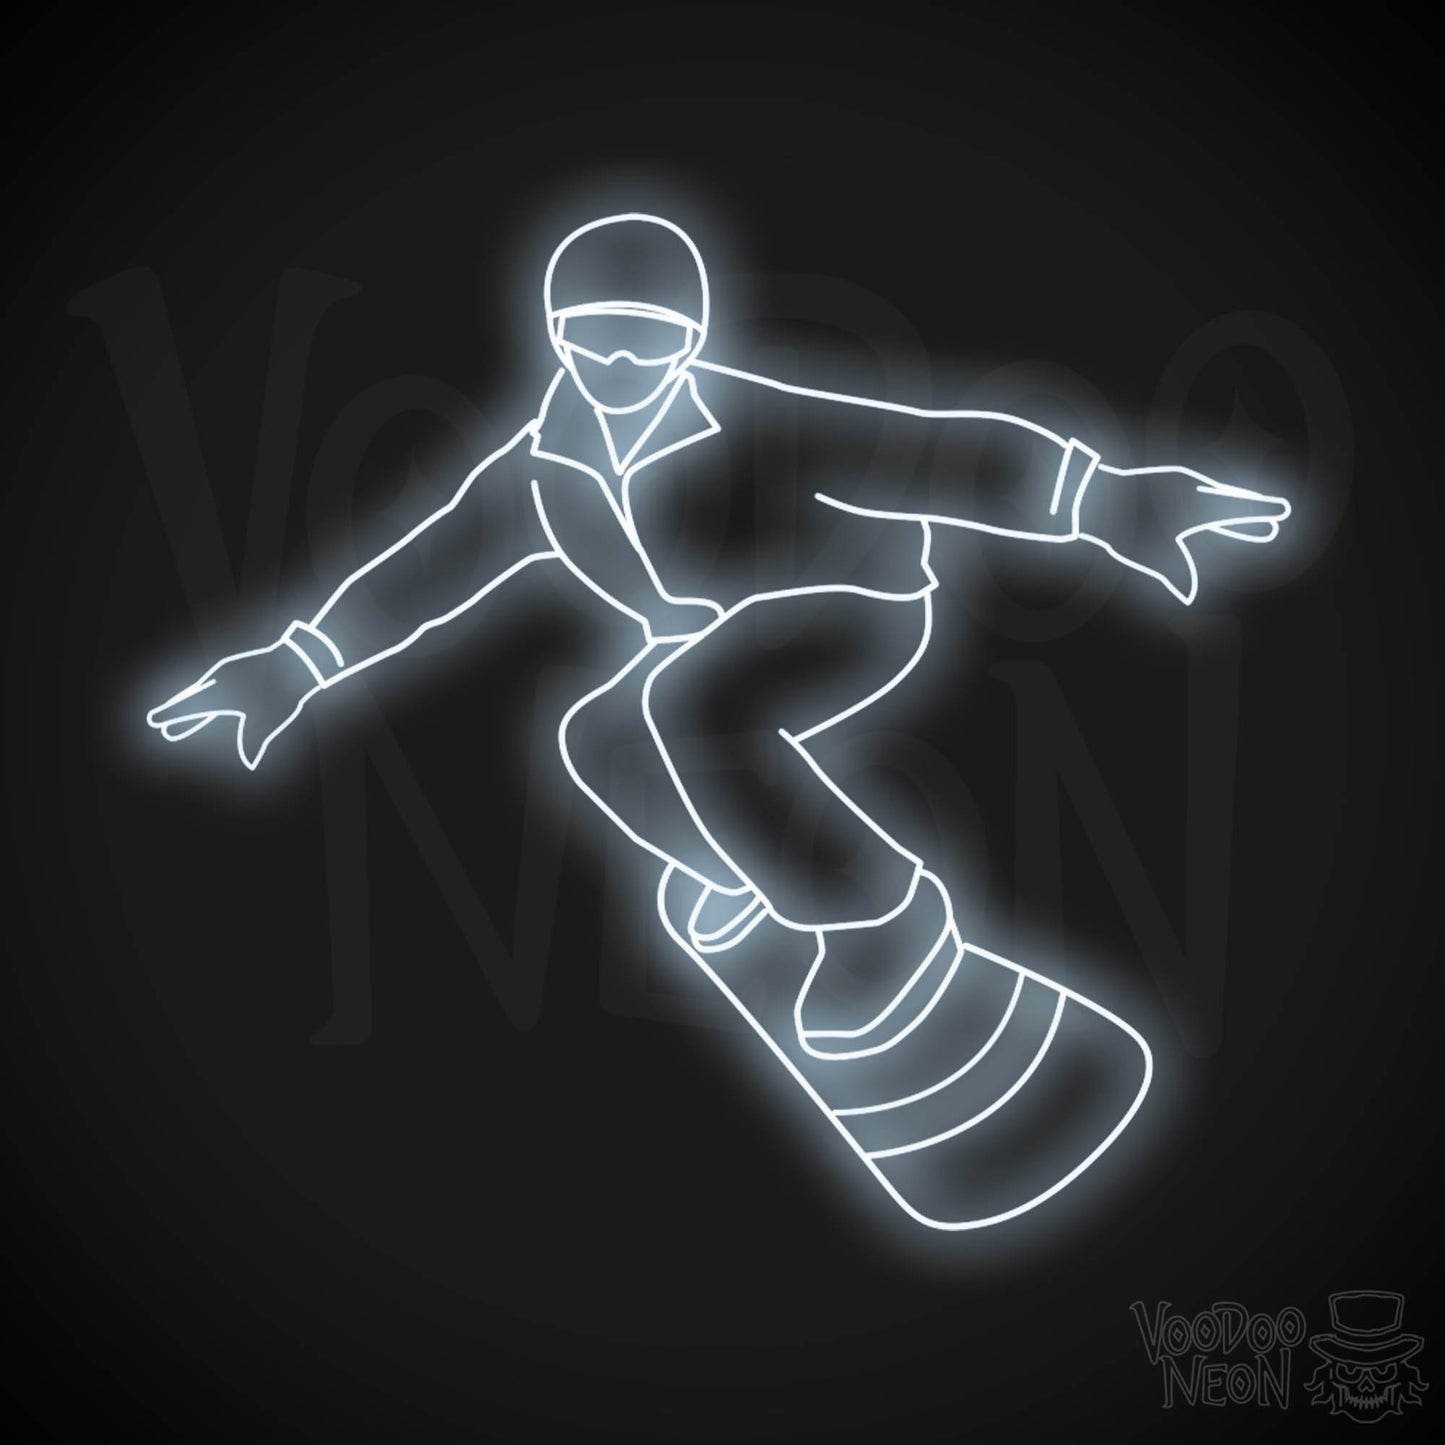 Snowboarding LED Neon - Cool White